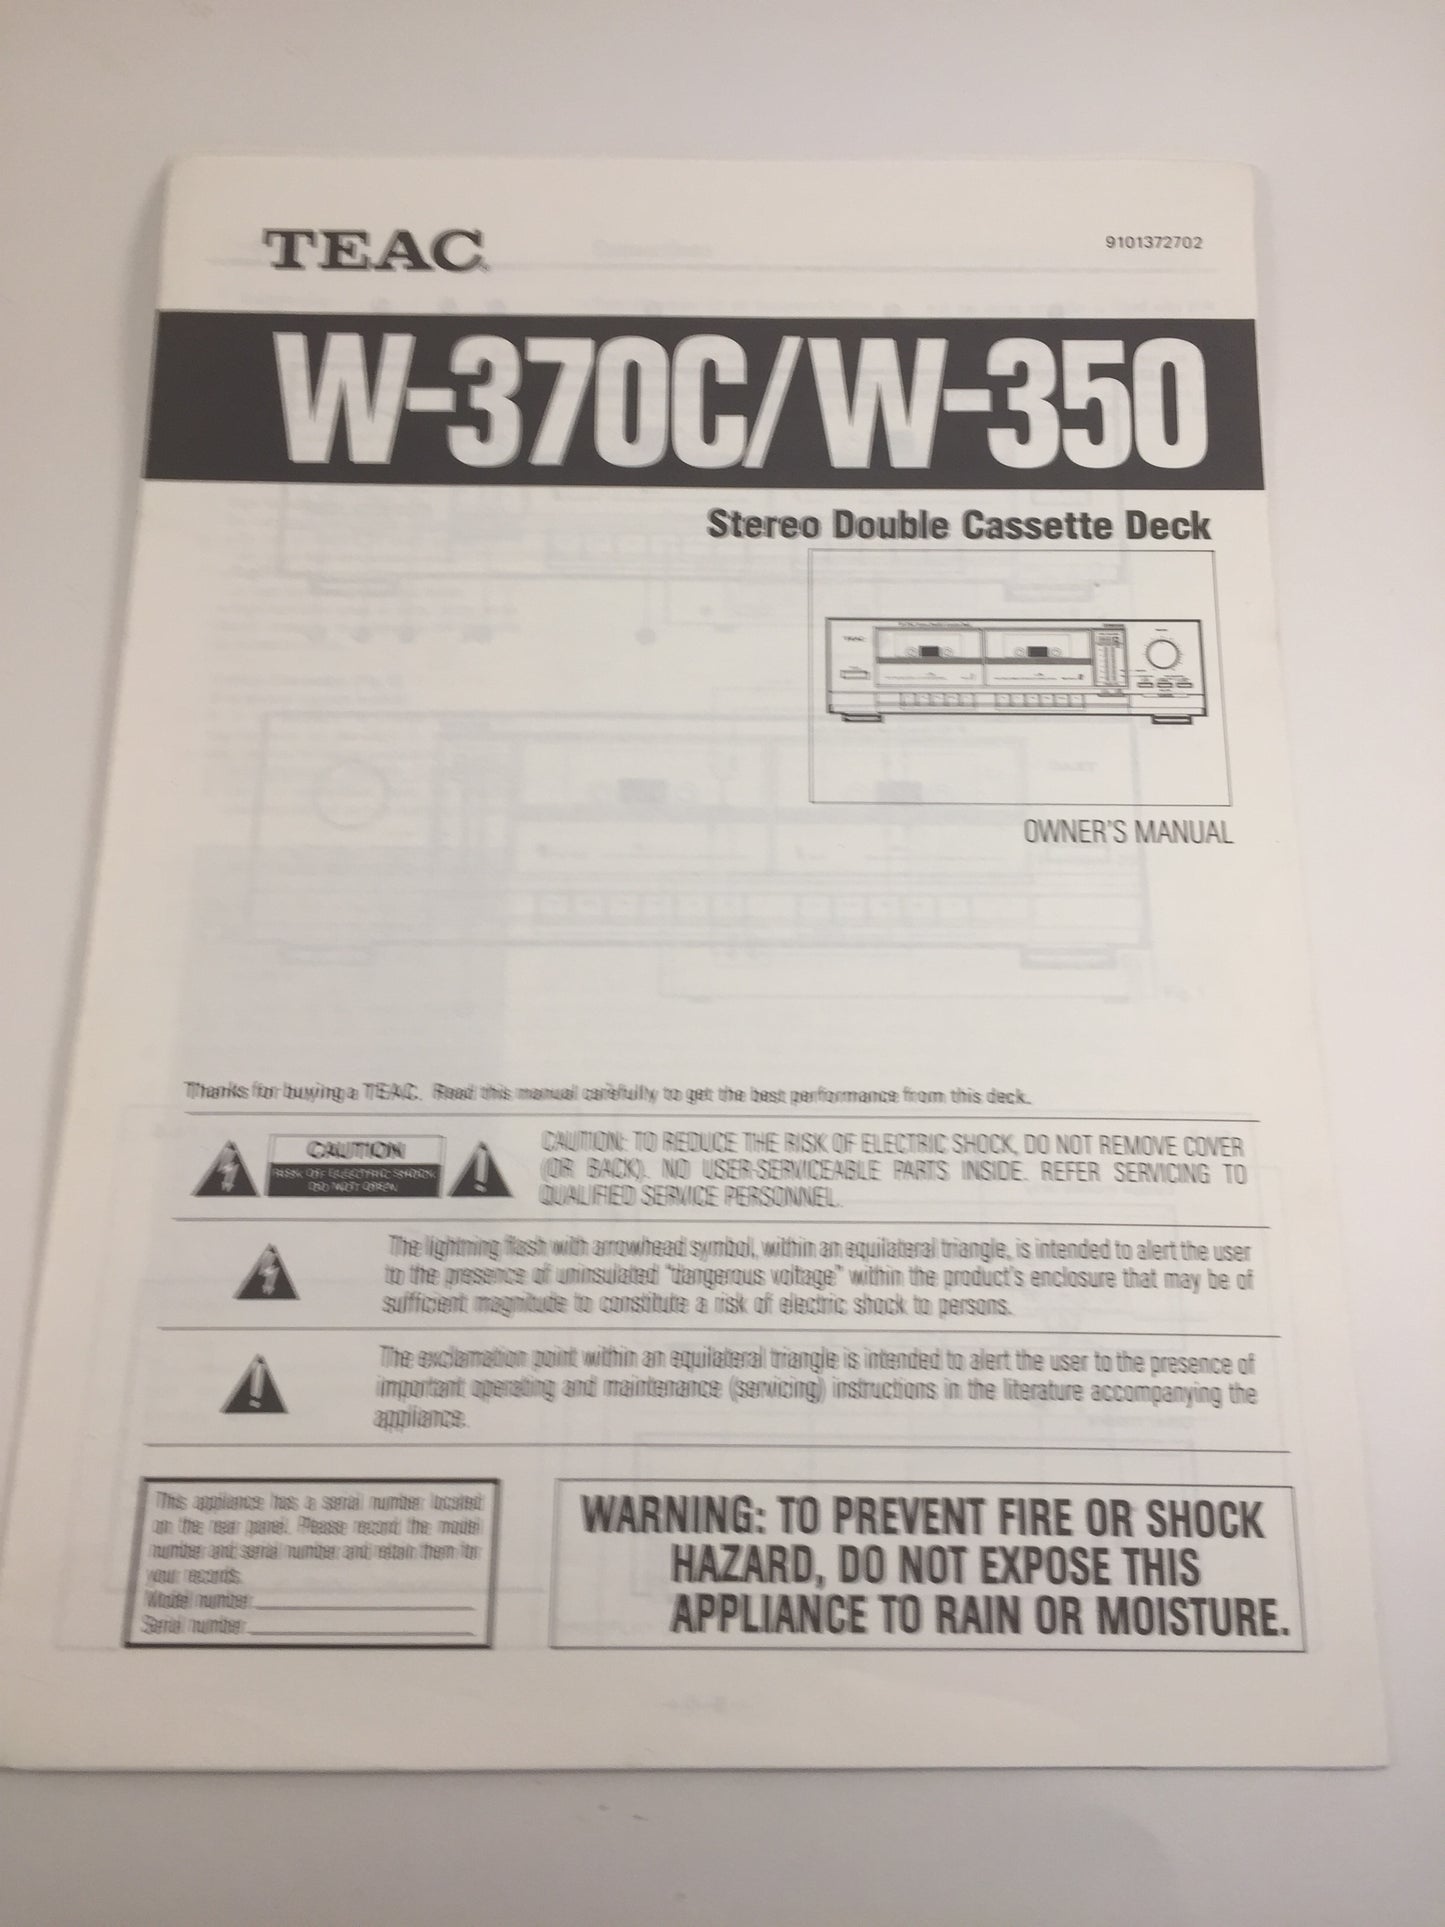 Teac W-370C/W-350 Stereo Double Cassette Deck Owner's Manual